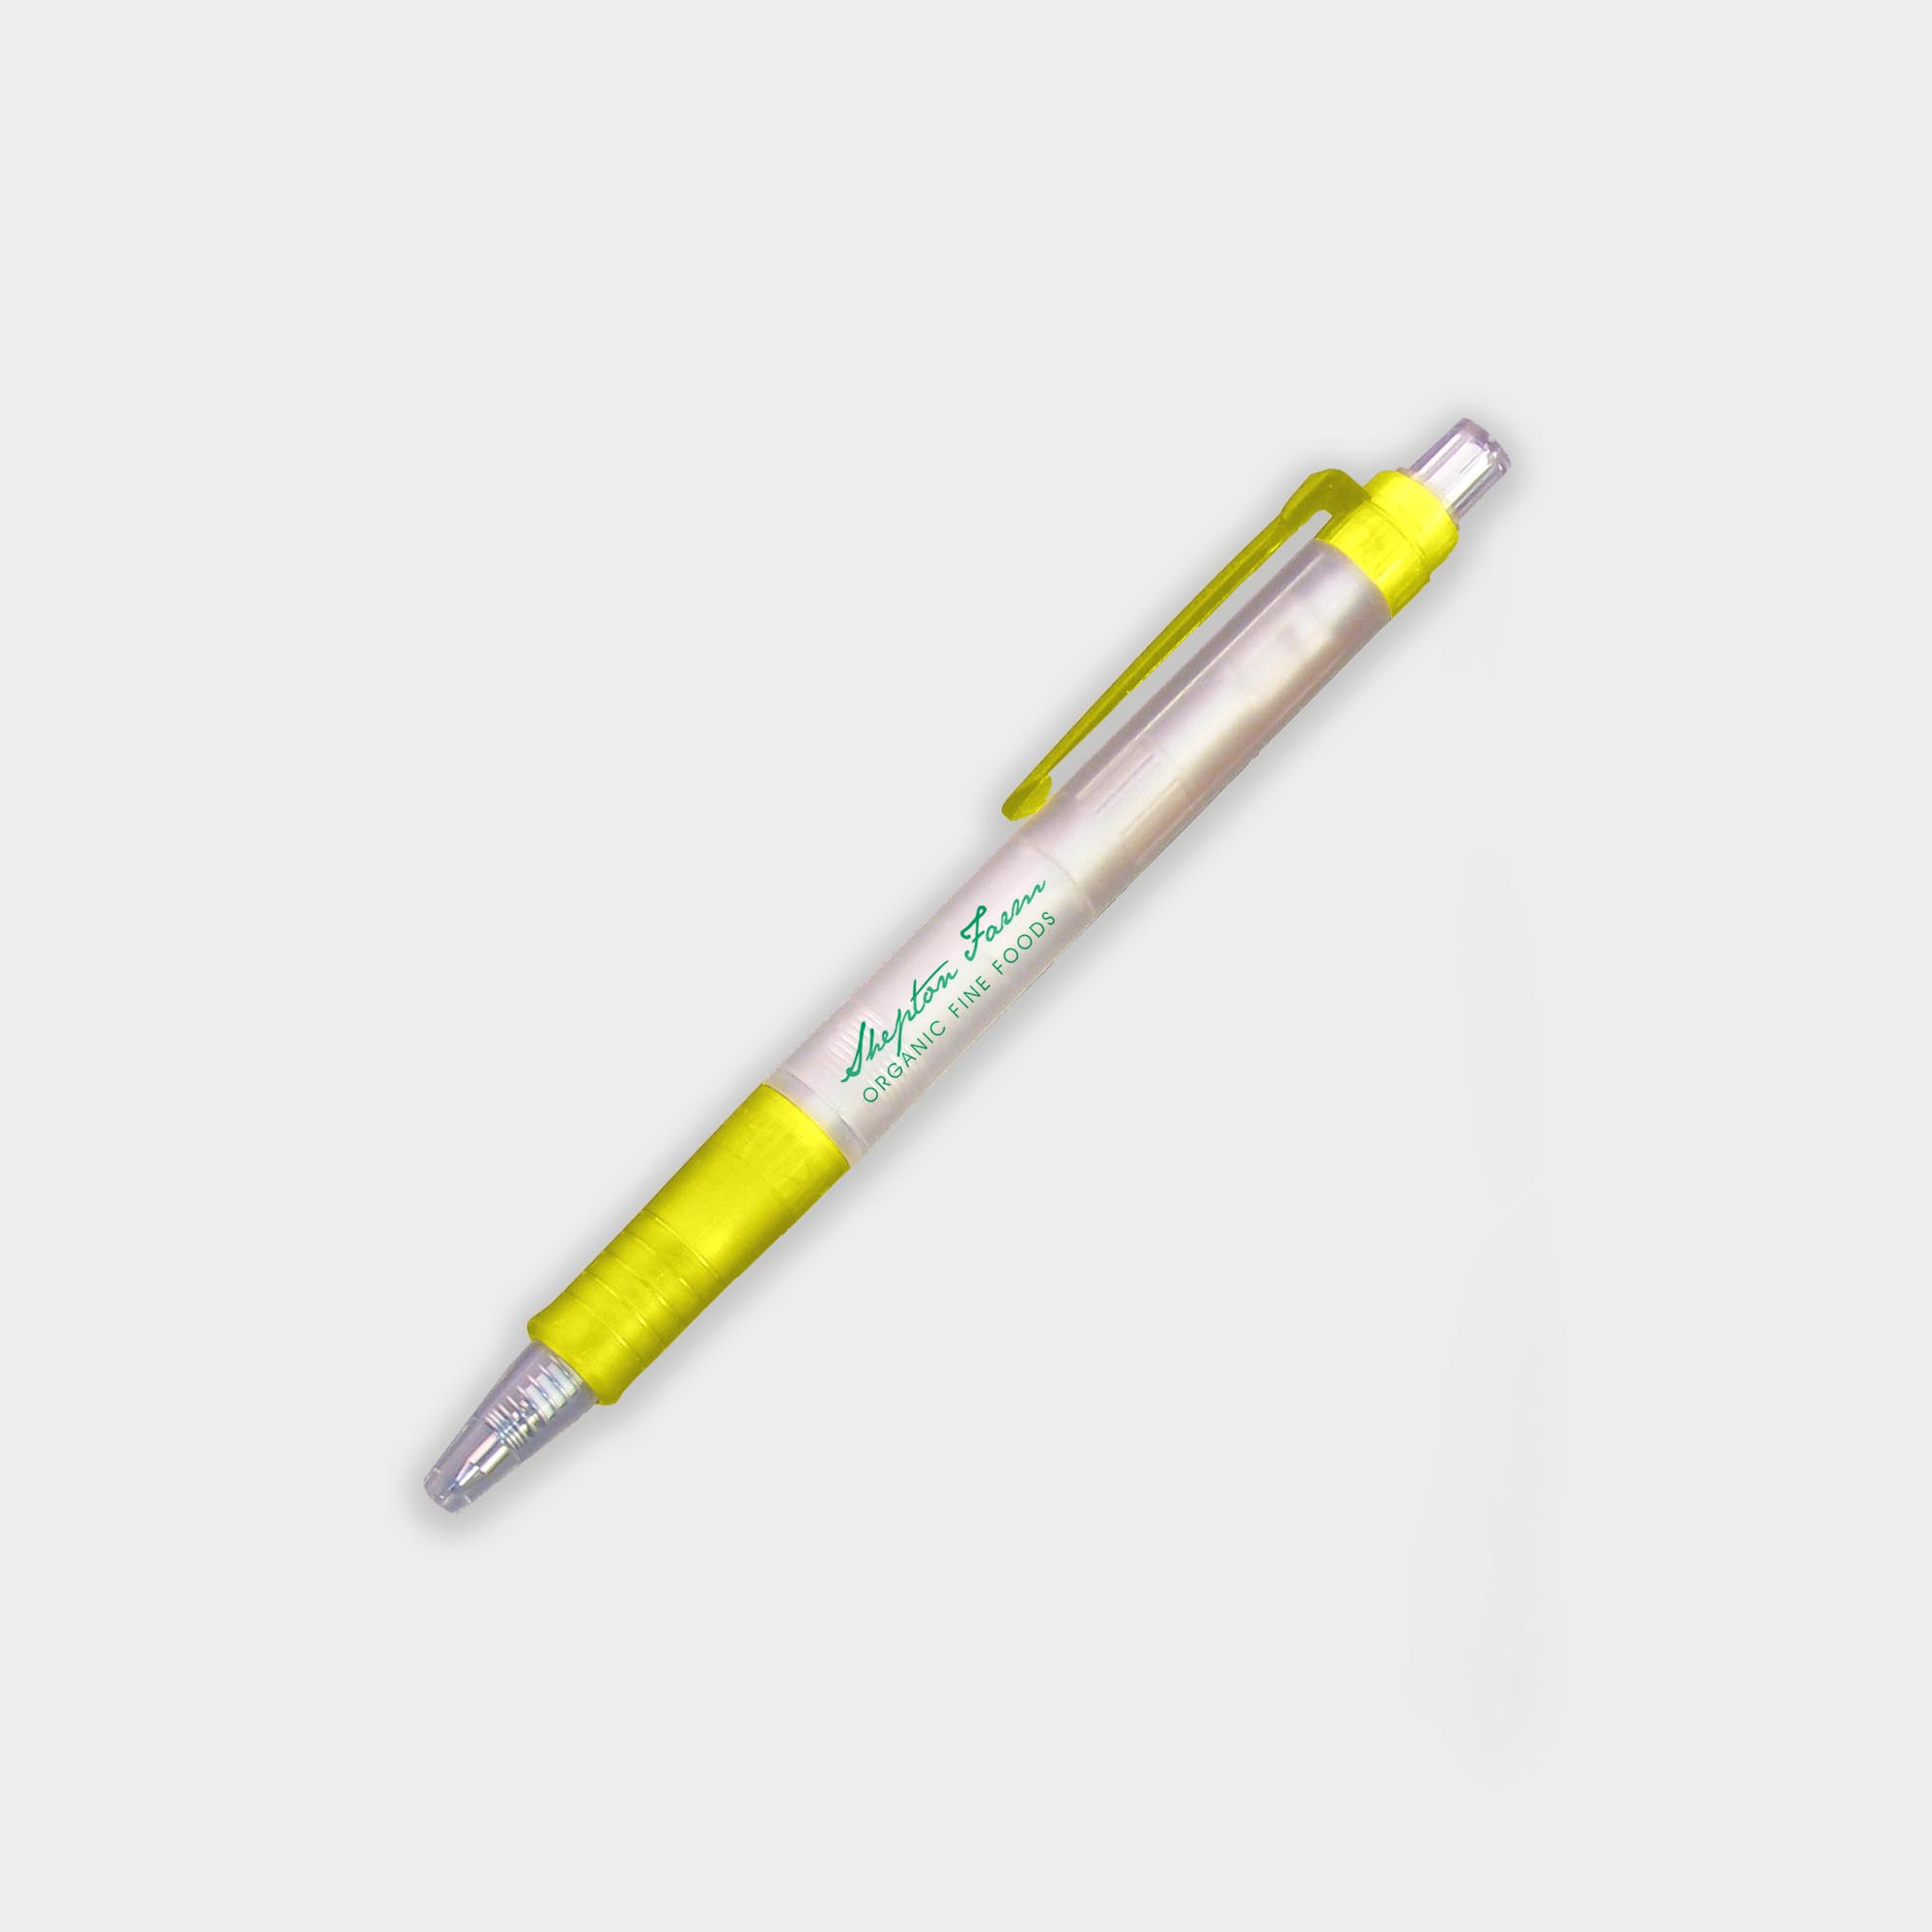 The Green & Good Bio Frost Biodegradable Pen. Corn based plastic pen with a frosted body and a push button. Available in a wide range of trim colours. Black ink as standard. Yellow